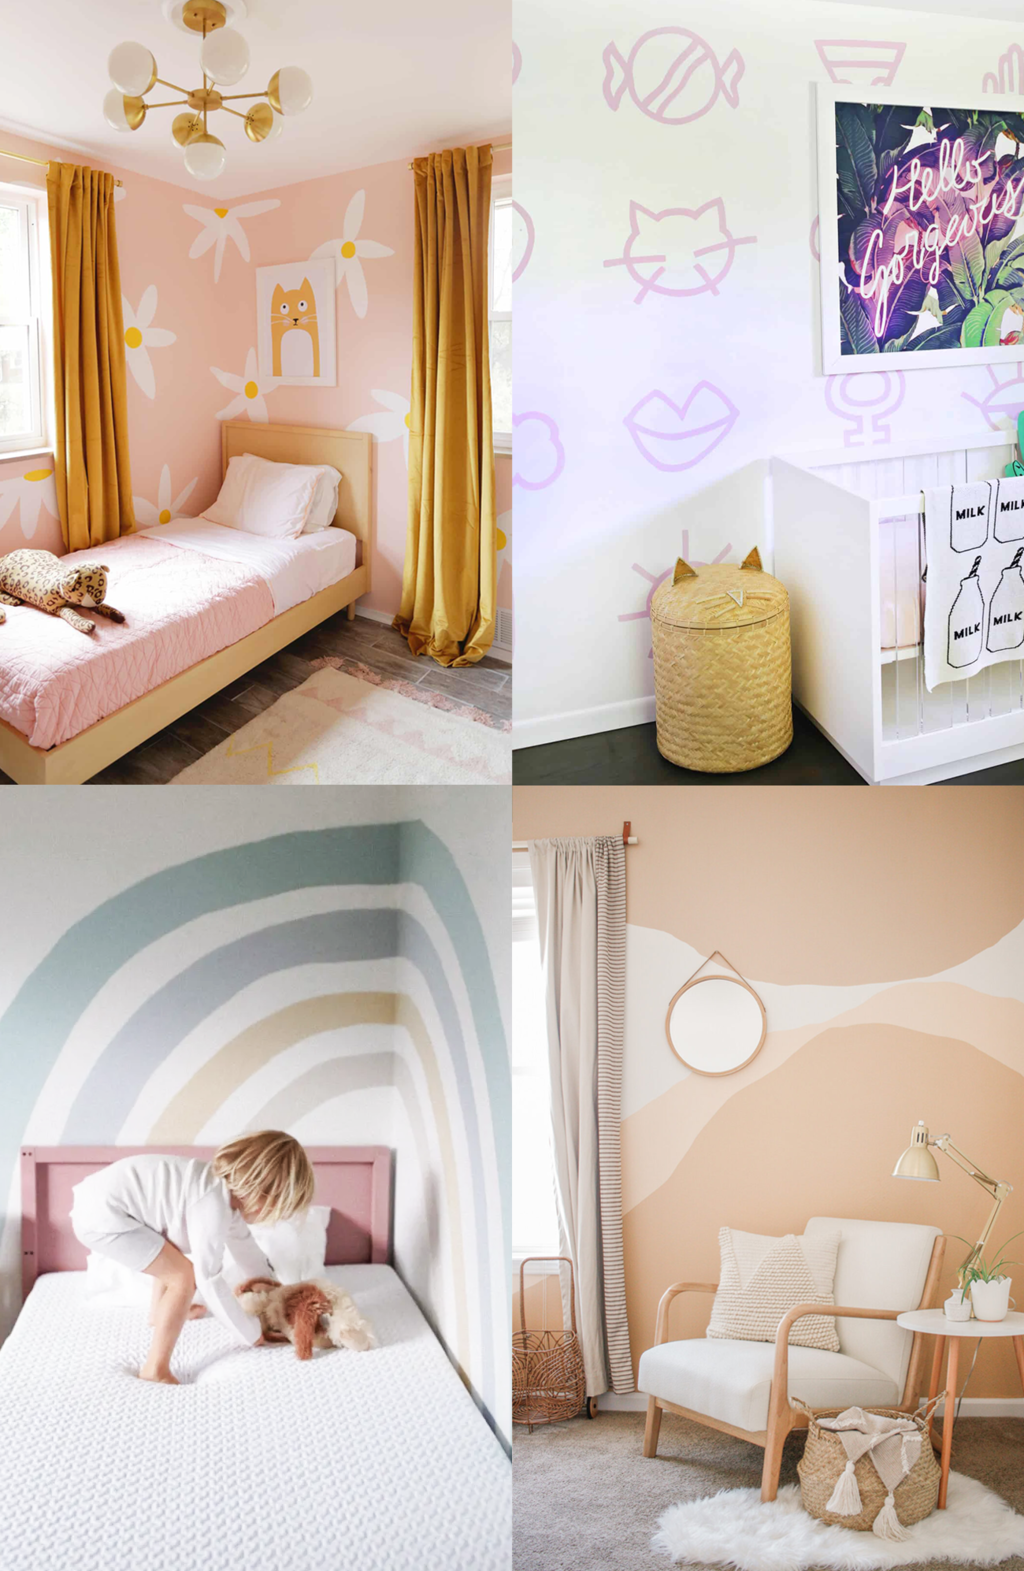 22 Girls’ Room Paint Ideas to Personalize Her Space